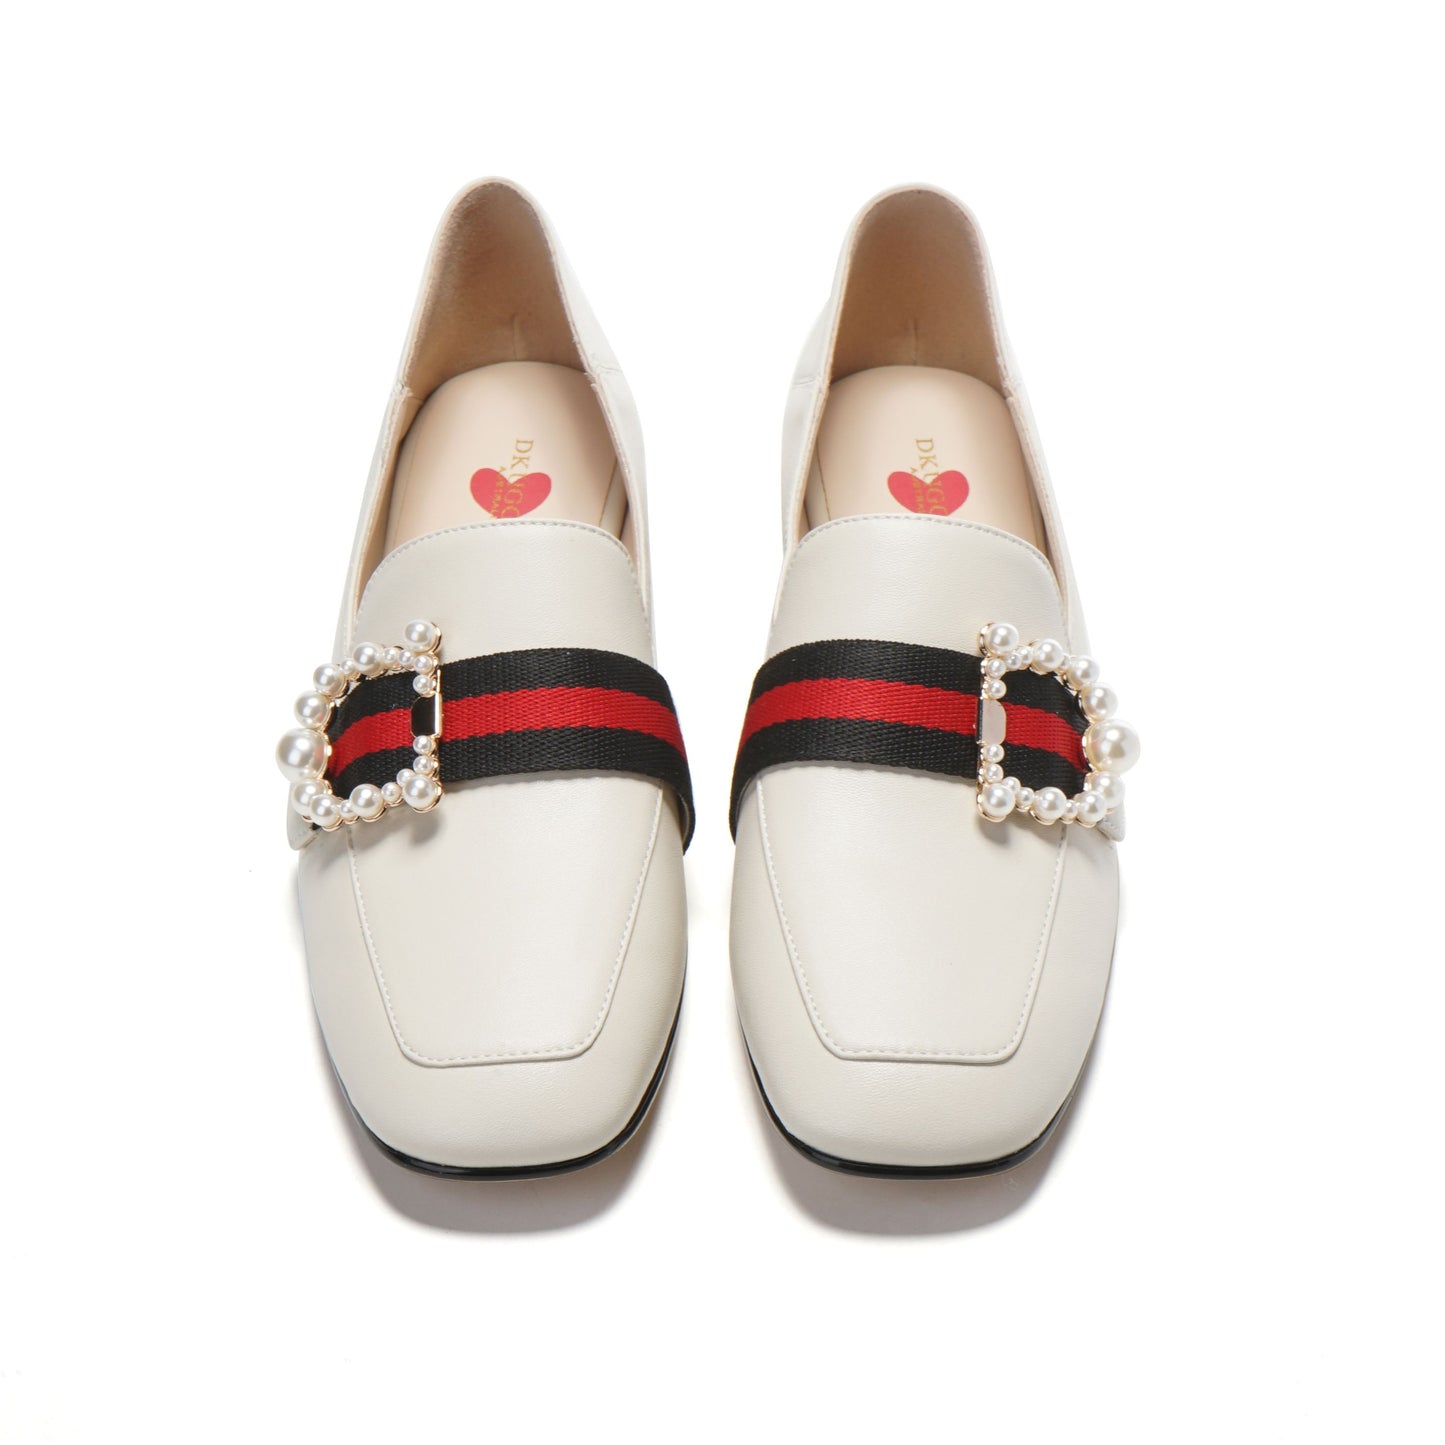 DK1630 Daisy Pearl -Strap Flat soft leather shoes